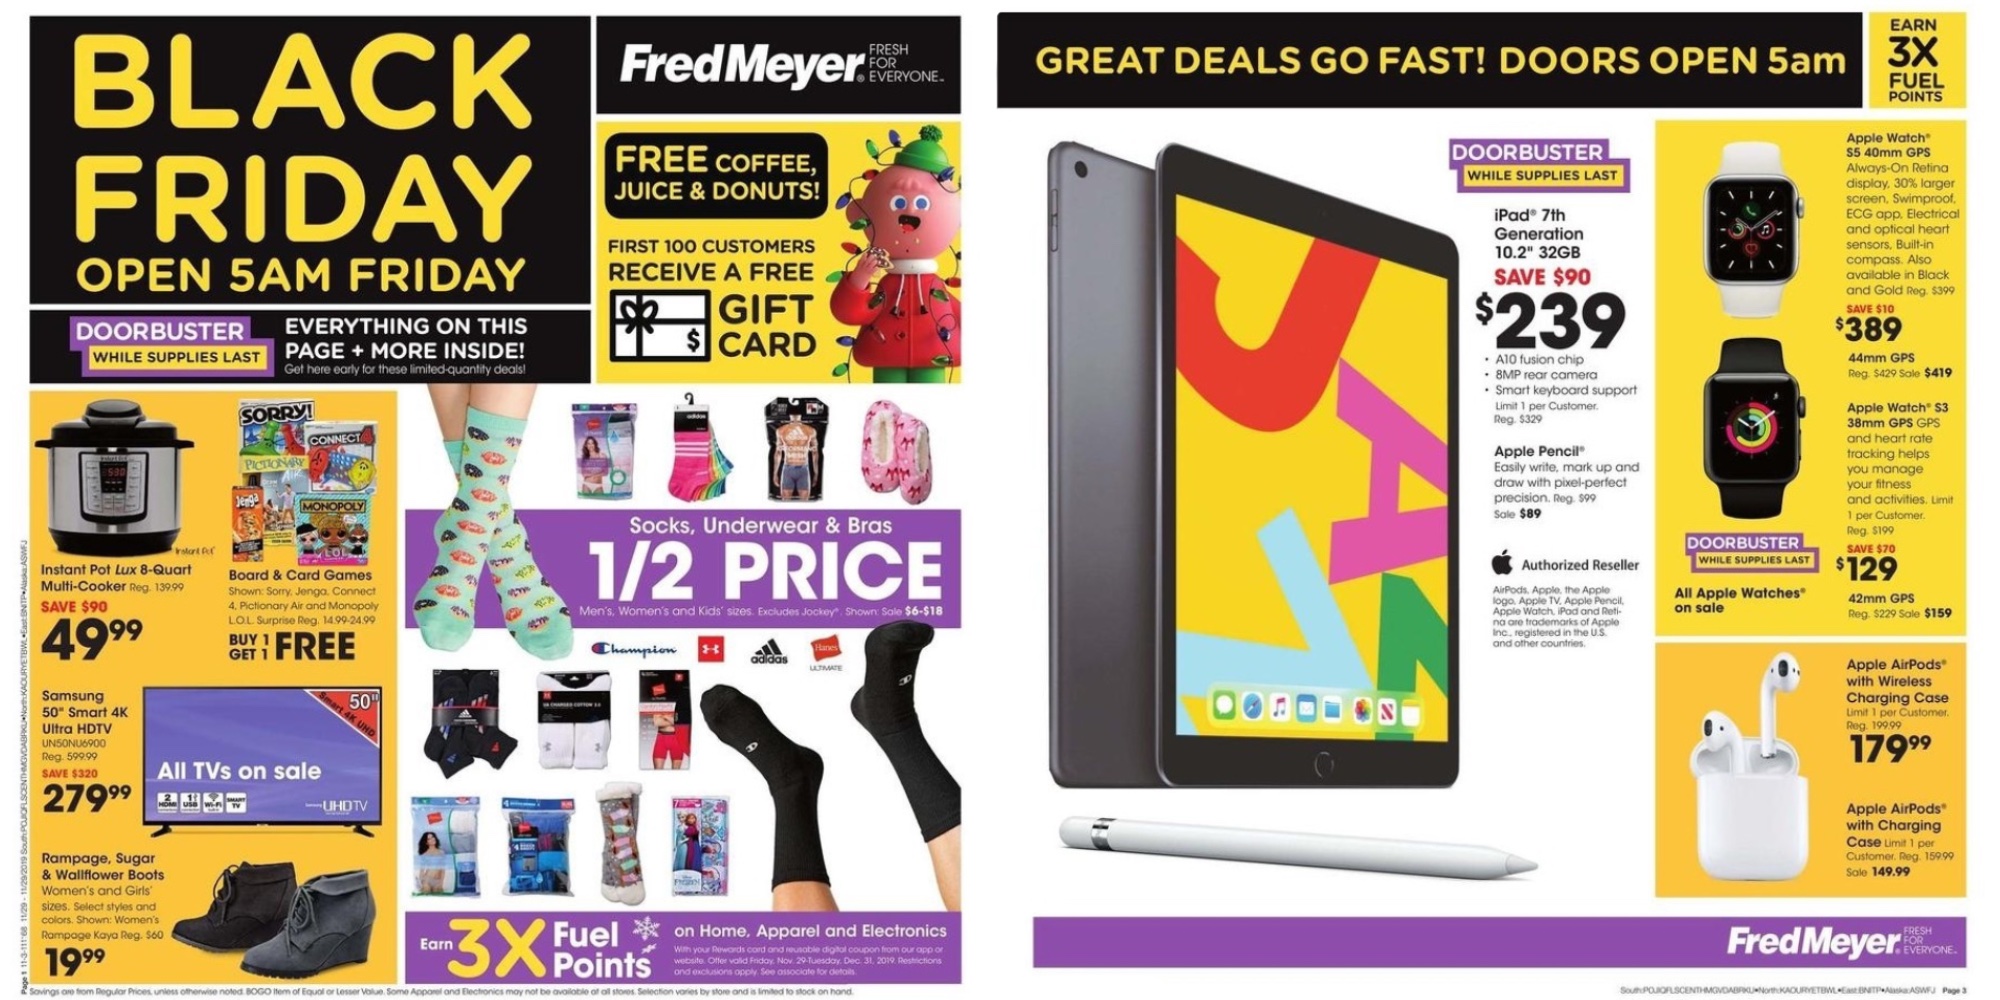 Fred Meyer Black Friday: 10.2-inch iPad $239, Apple Watch S3, more